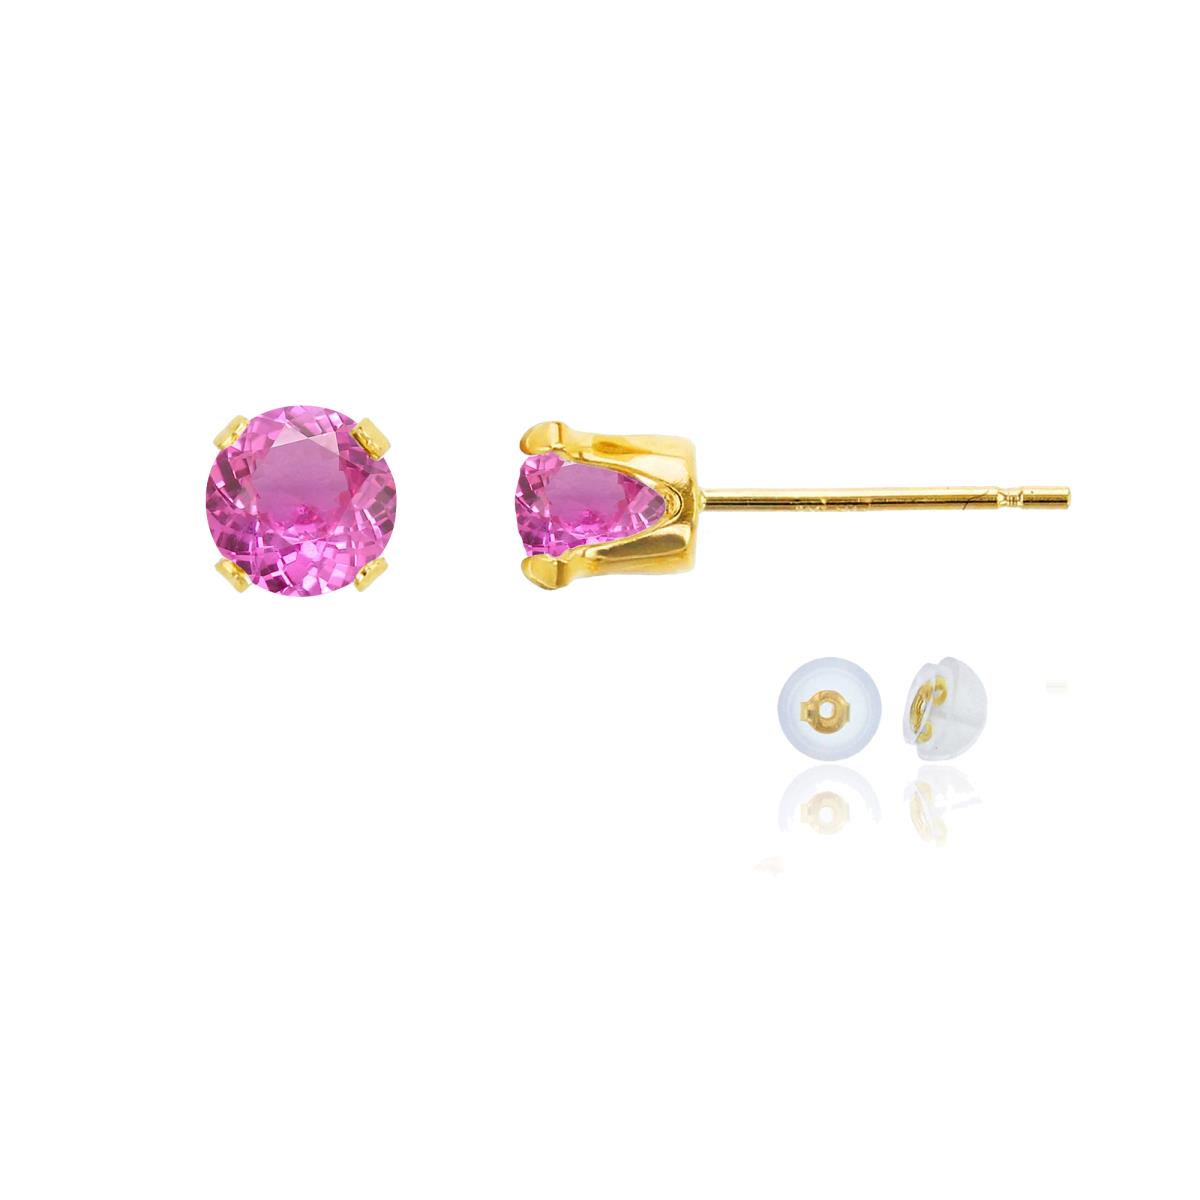 10K Yellow Gold 5mm Round Cr Pink Sapphire Stud Earring with Silicone Back